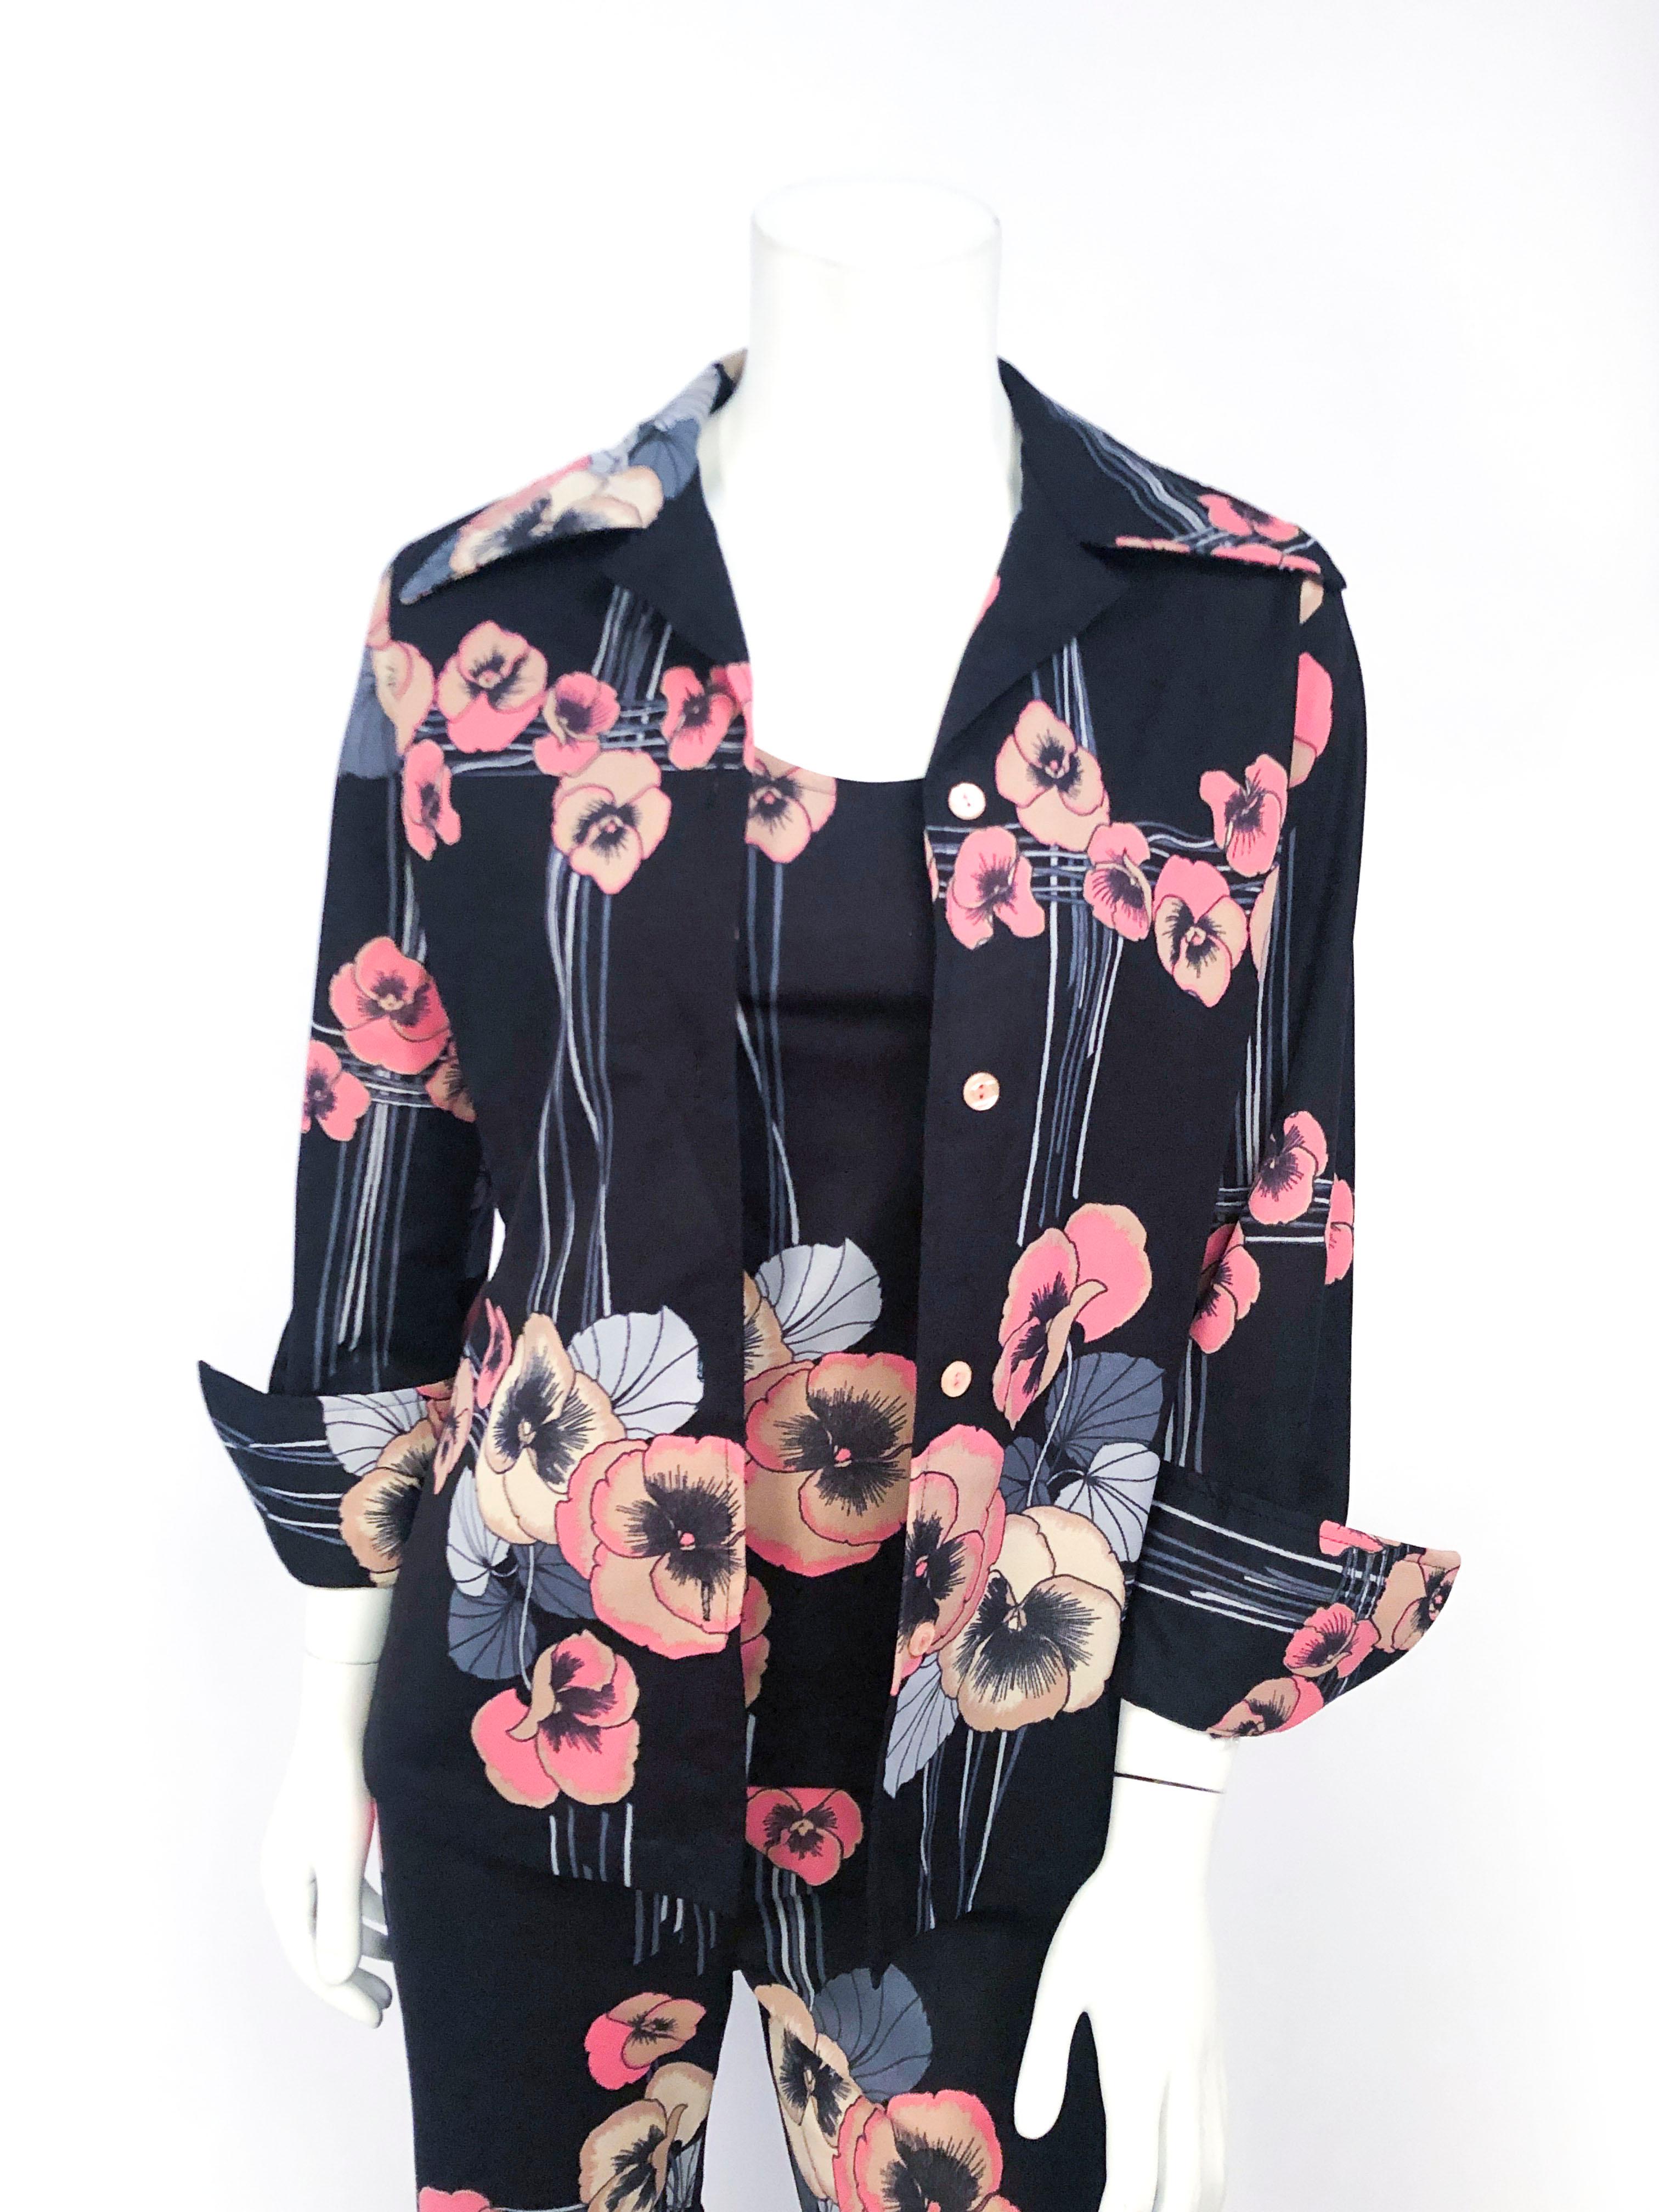 1970s black 3-piece set (shirt jacket, blouse, and pants) with stripe and floral pattern in different tones of blue and soft pinks. Shirt jacket has a wide butterfly collar and folded cuff sleeves. The blouse is a sleeveless tank top and the wide